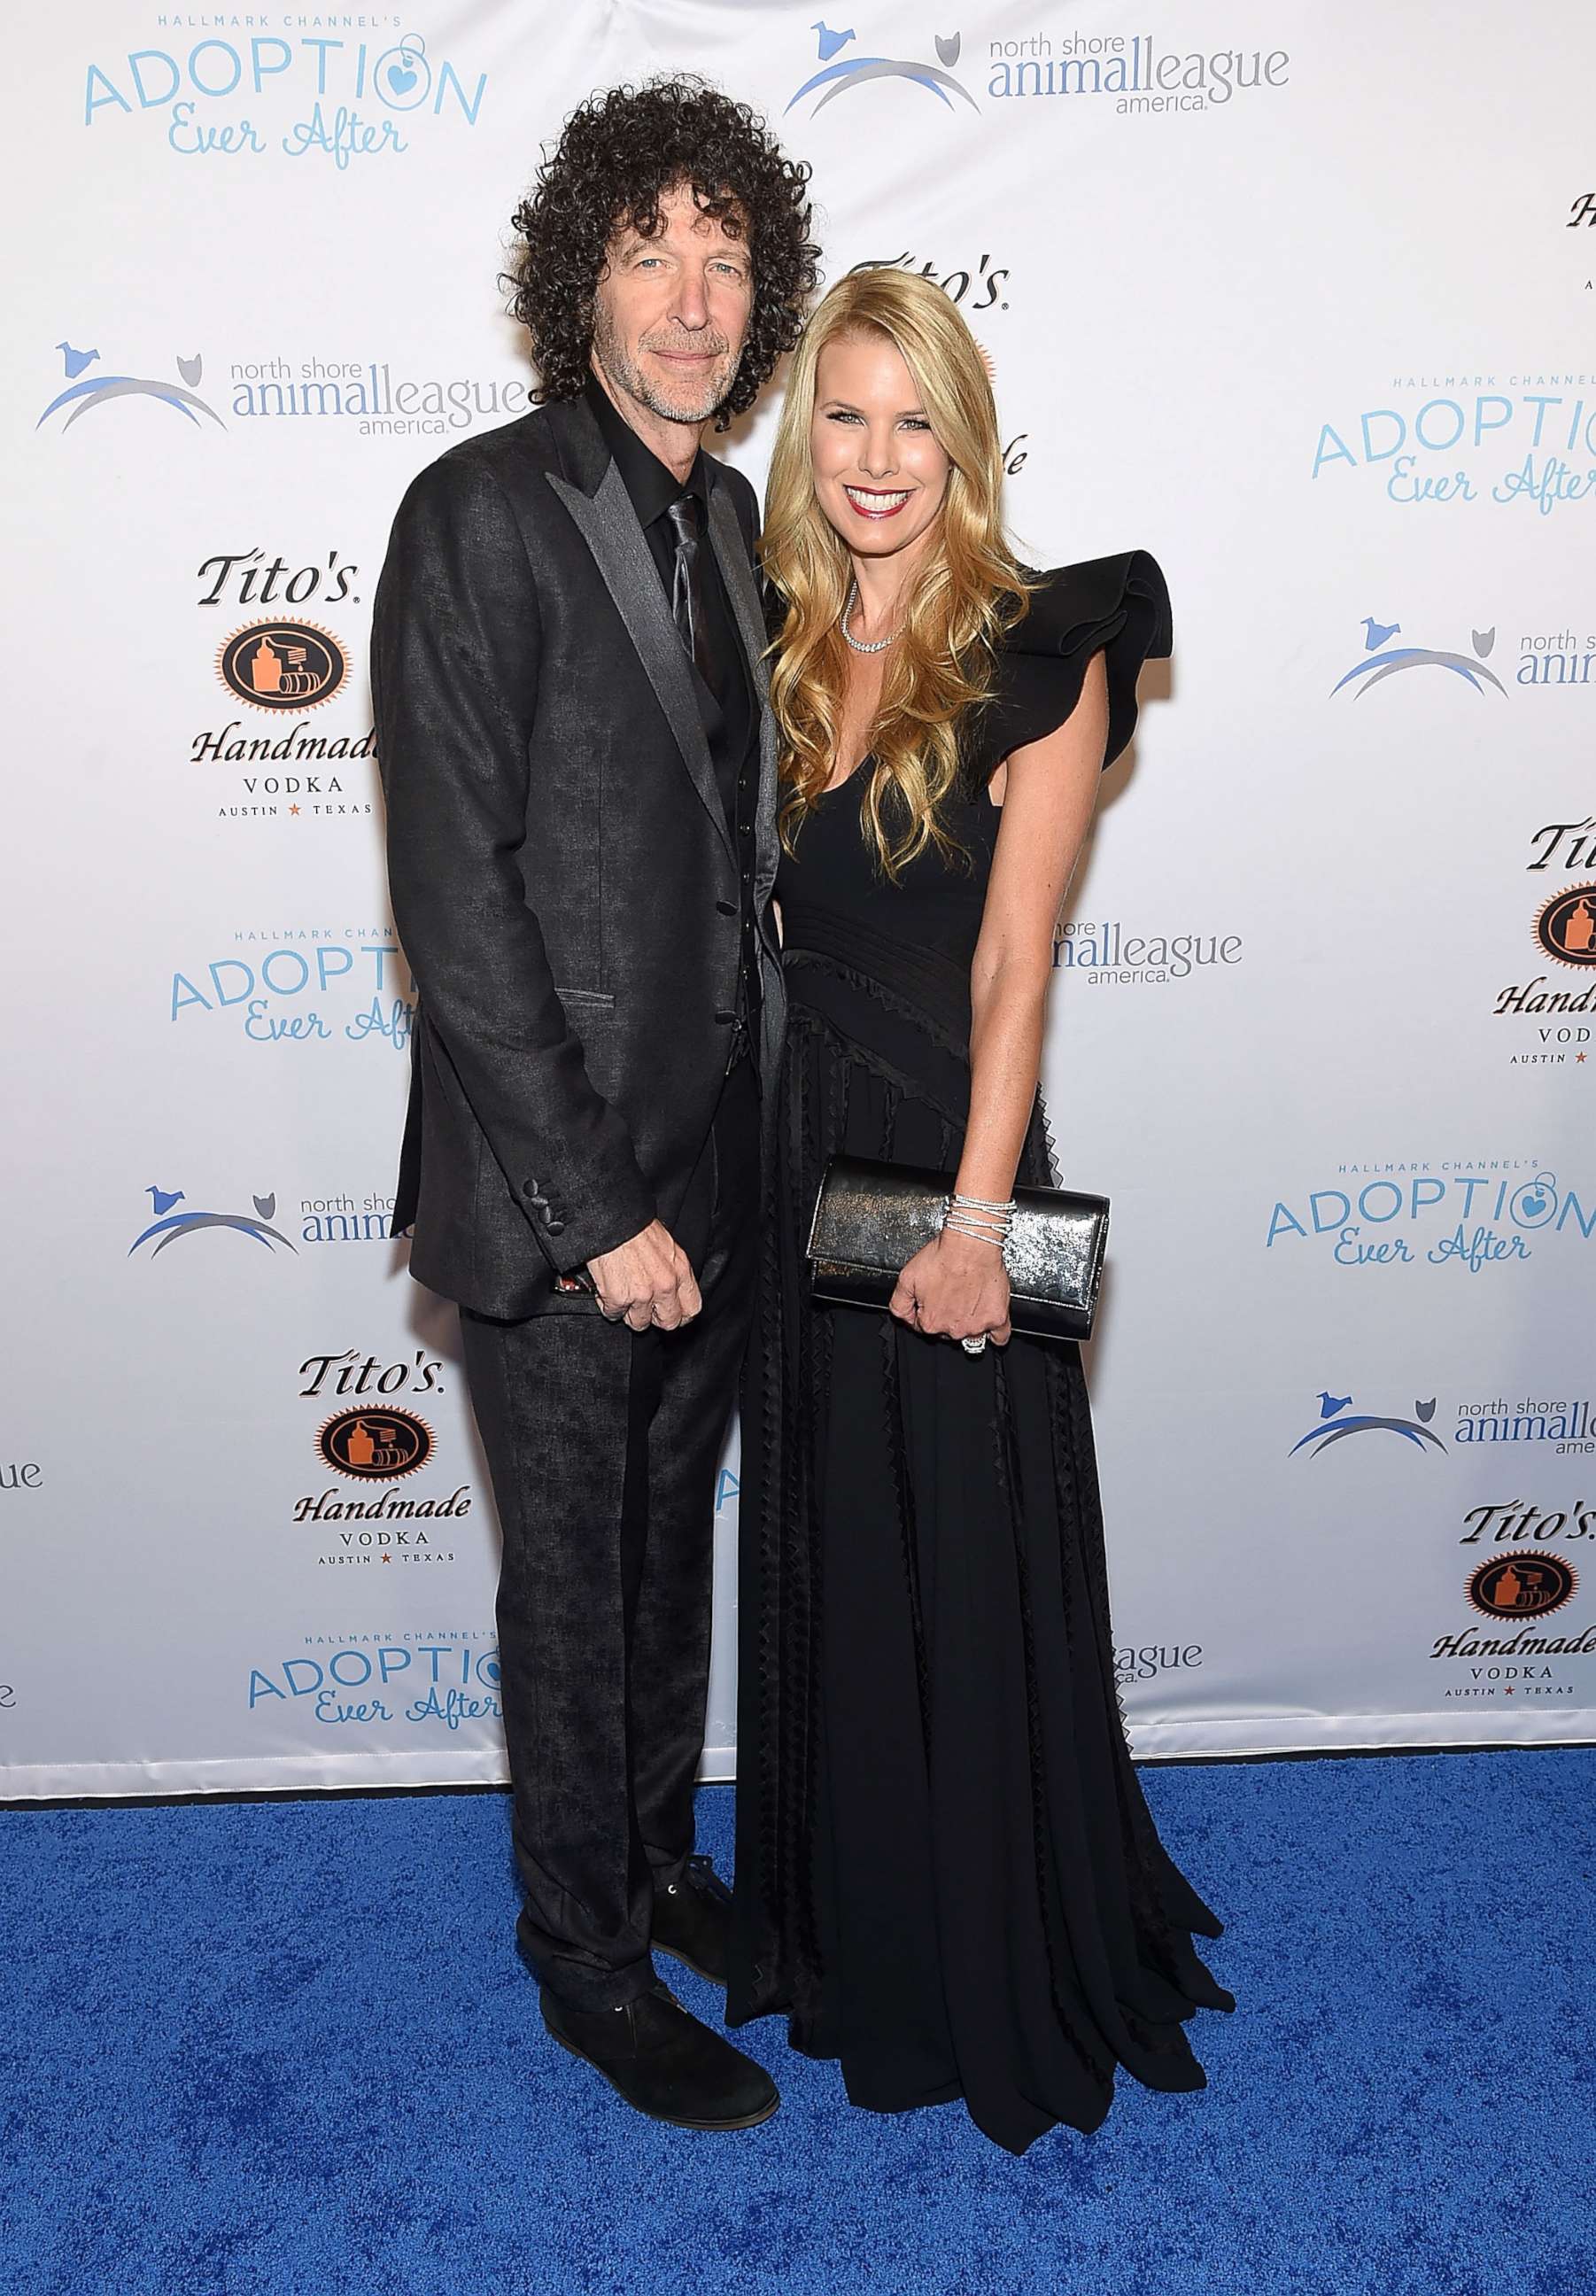 PHOTO: Howard Stern and Beth Stern attend the North Shore Animal League America's Annual Celebrity "Get Your Rescue On" Gala at Pier Sixty at Chelsea Piers, Nov. 30, 2018 in New York City.